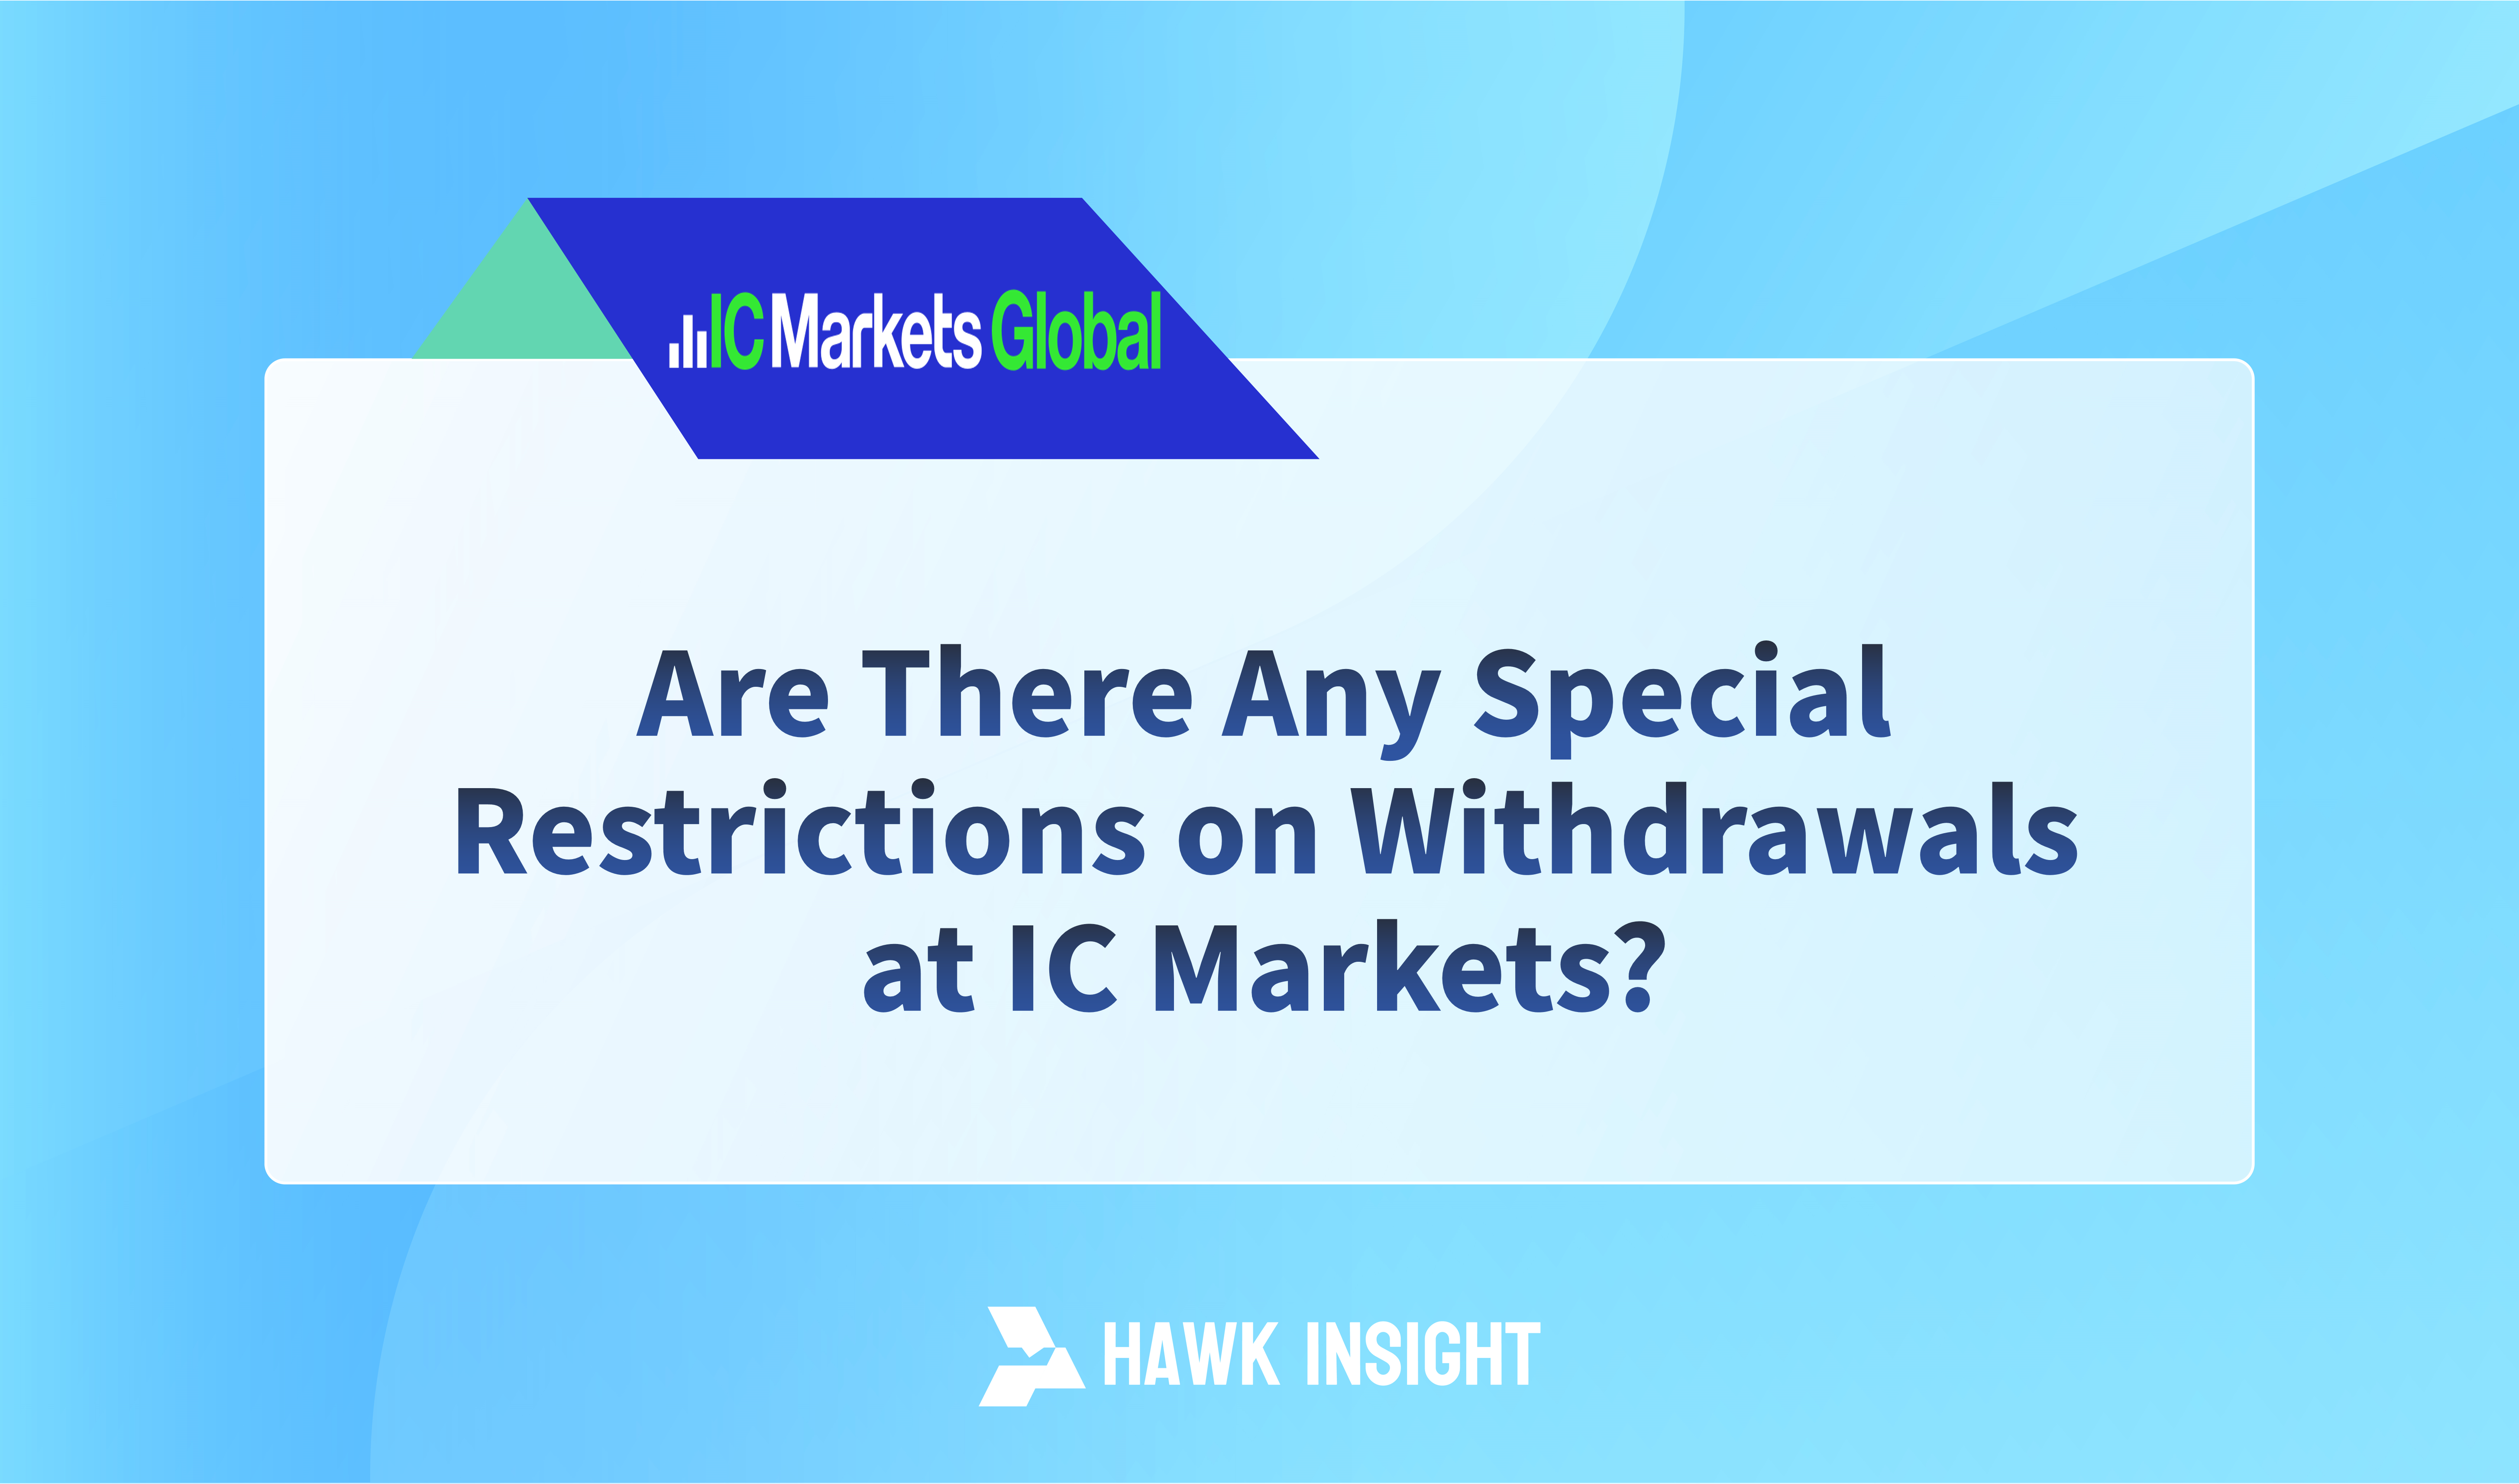 Are There Any Special Restrictions on Withdrawals at IC Markets?